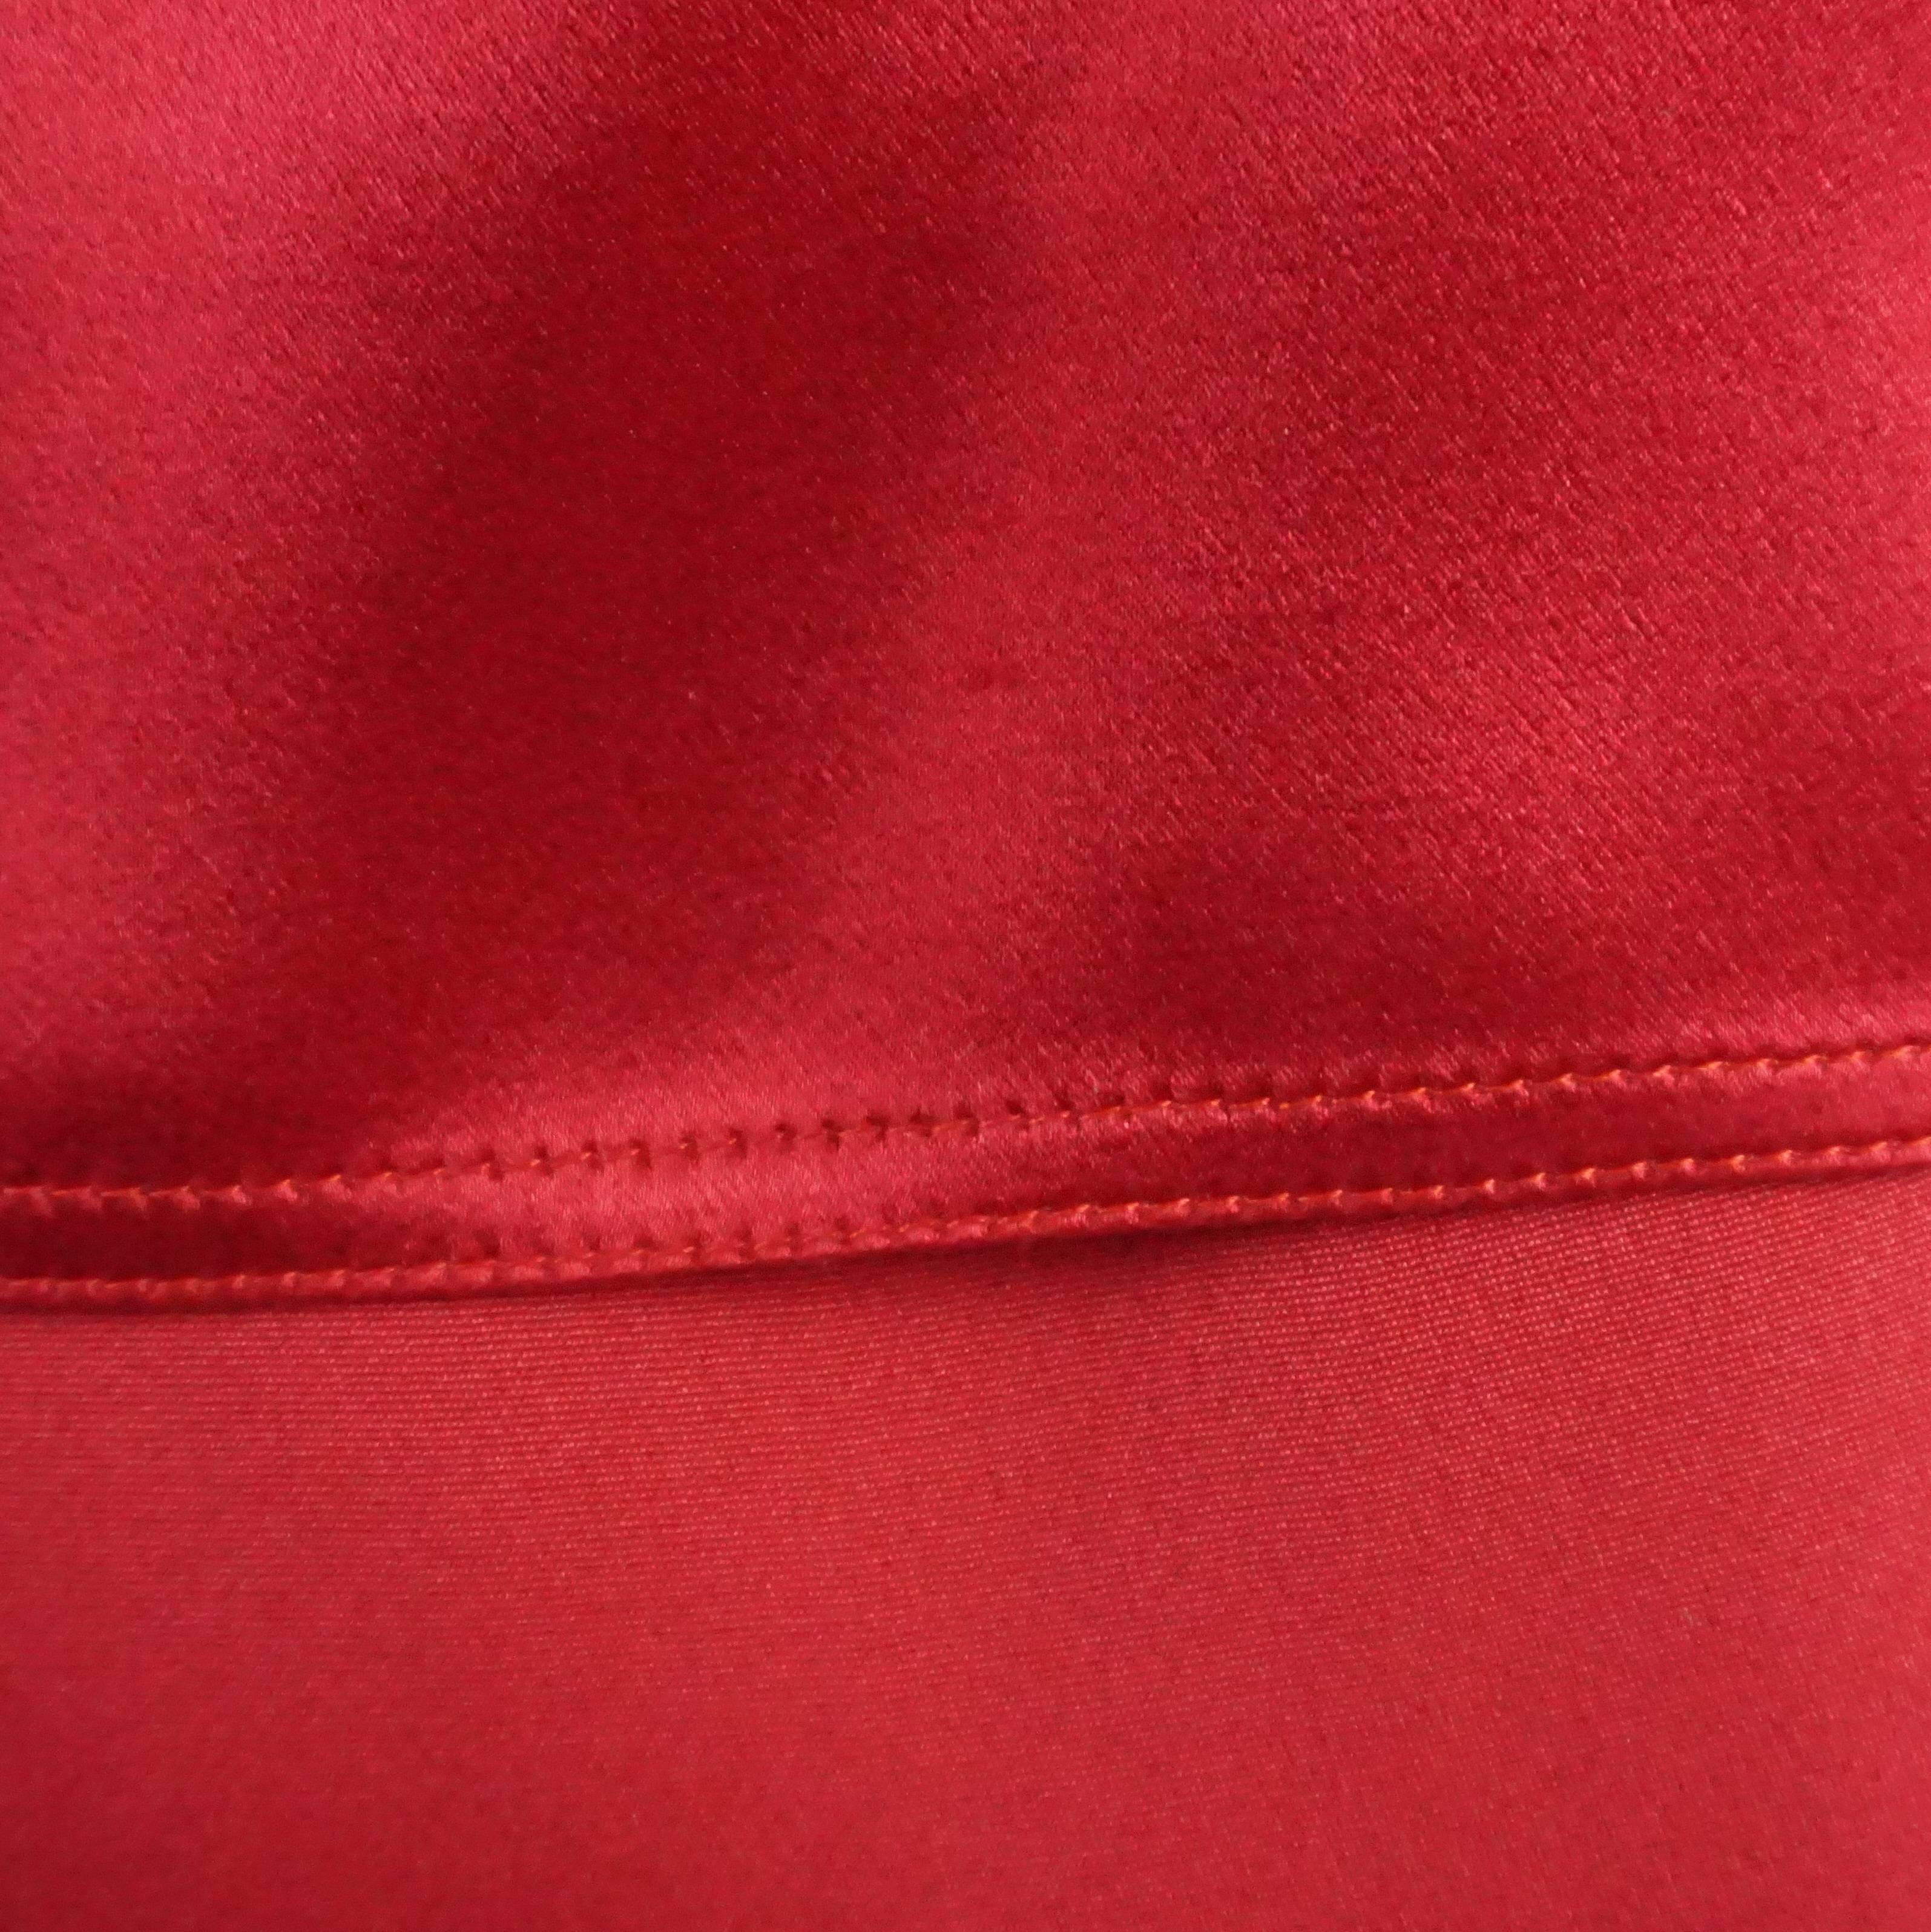 Gianni Versace 1990's Red Silk Skirt Set - 40 For Sale 2